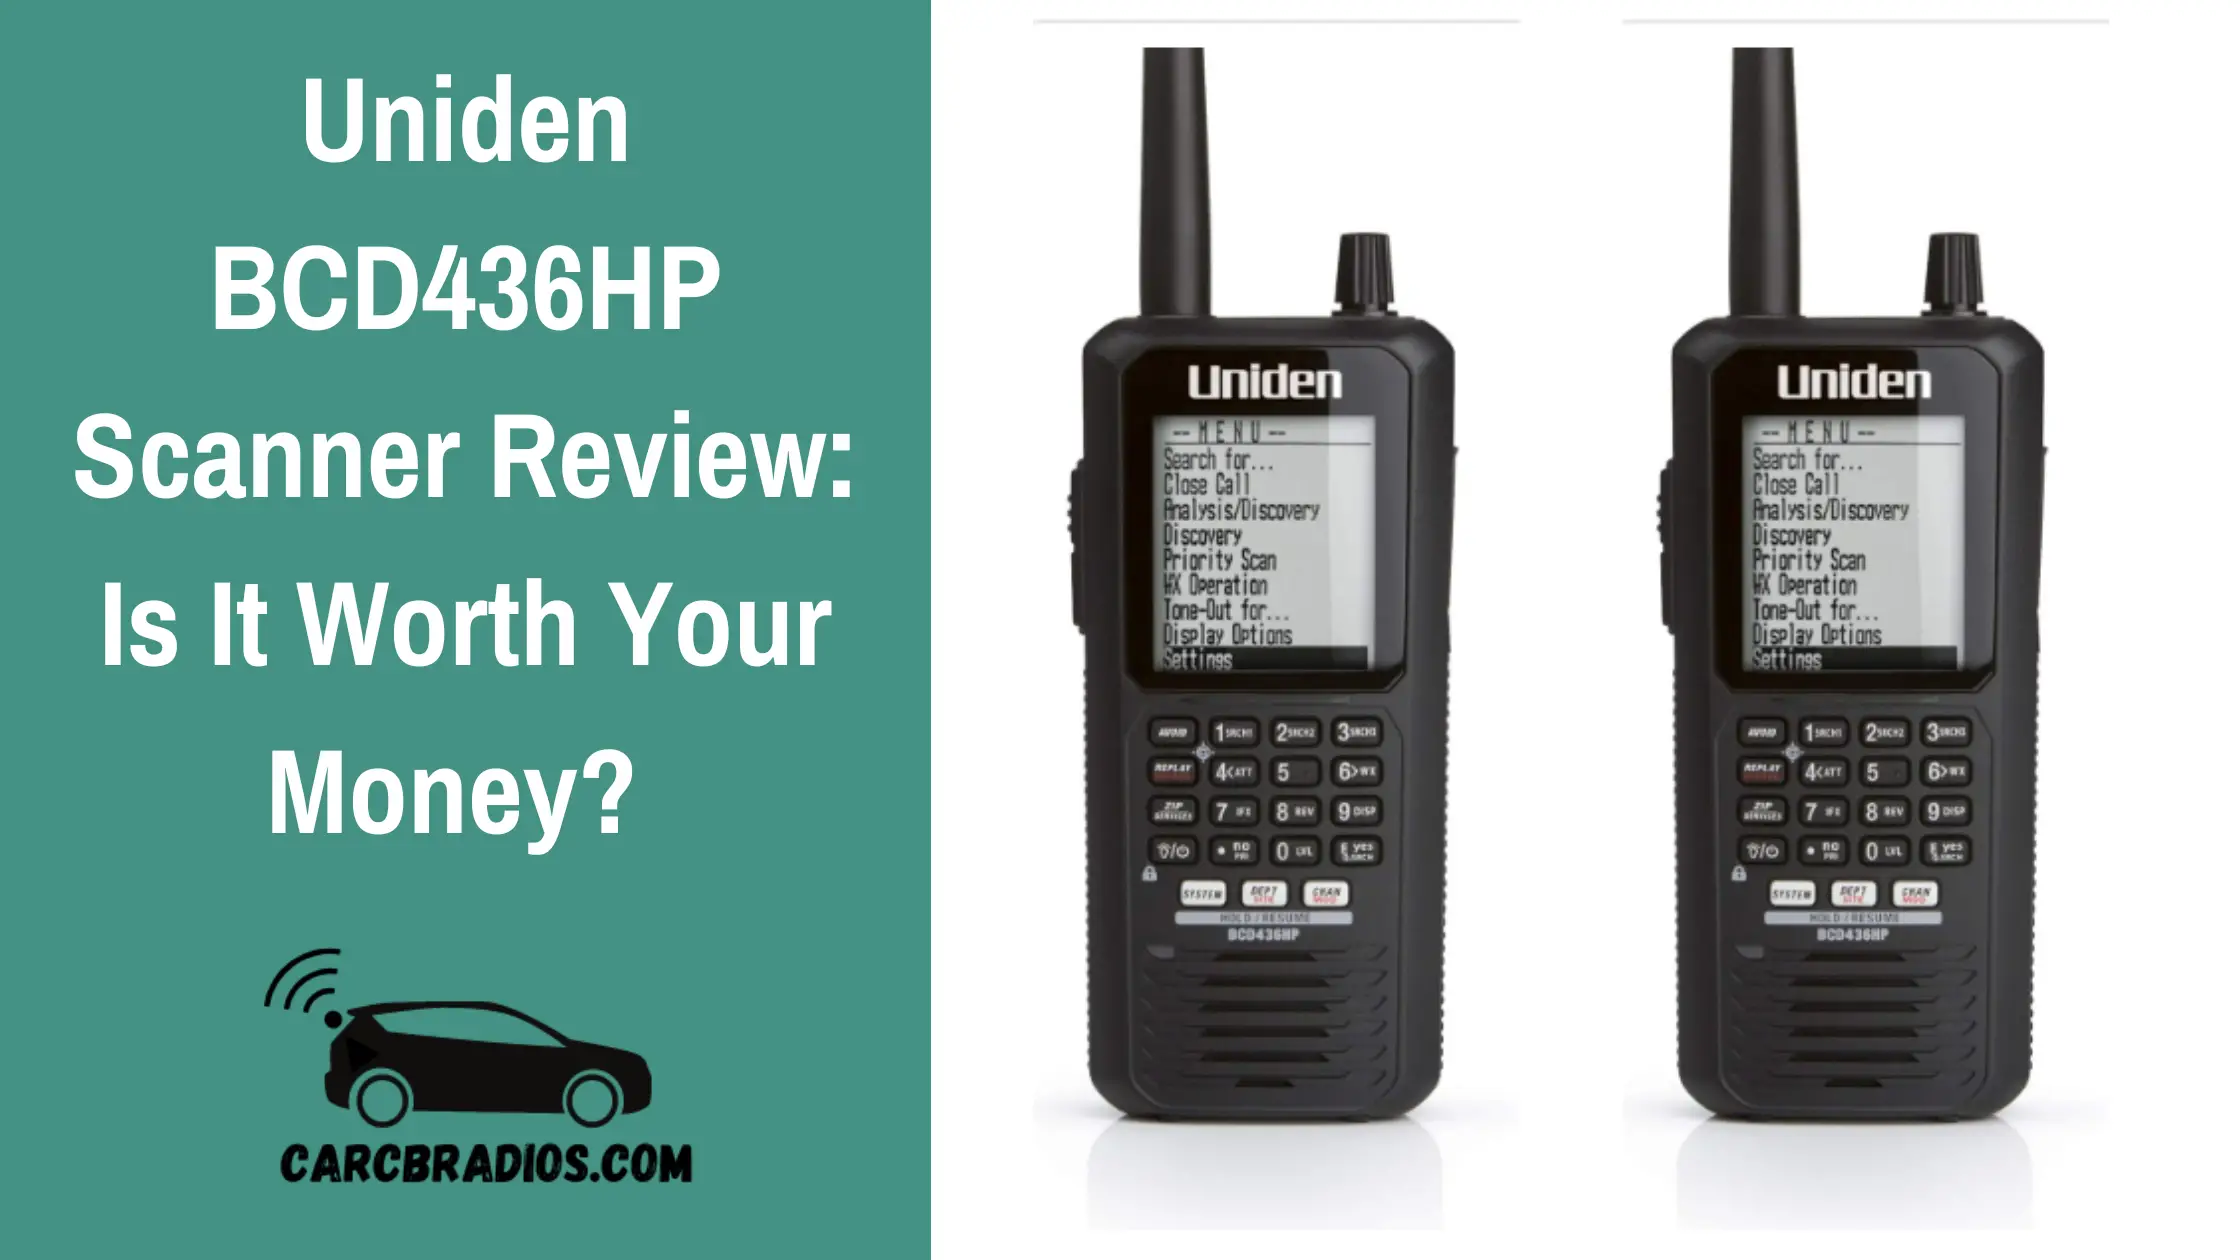 I recently got my hands on the Uniden BCD436HP and was impressed with how simple it was to operate. No programming was needed. All I had to do was turn it on, enter my zip code, and TrunkTracker V did the rest. This user-friendly digital scanner immediately began receiving communications used by Public Safety, Police, Fire, EMS, Ambulance, Aircraft, Military, Weather, and more. With a scan speed of 85 channels per second, I was able to stay informed on everything happening in my area.